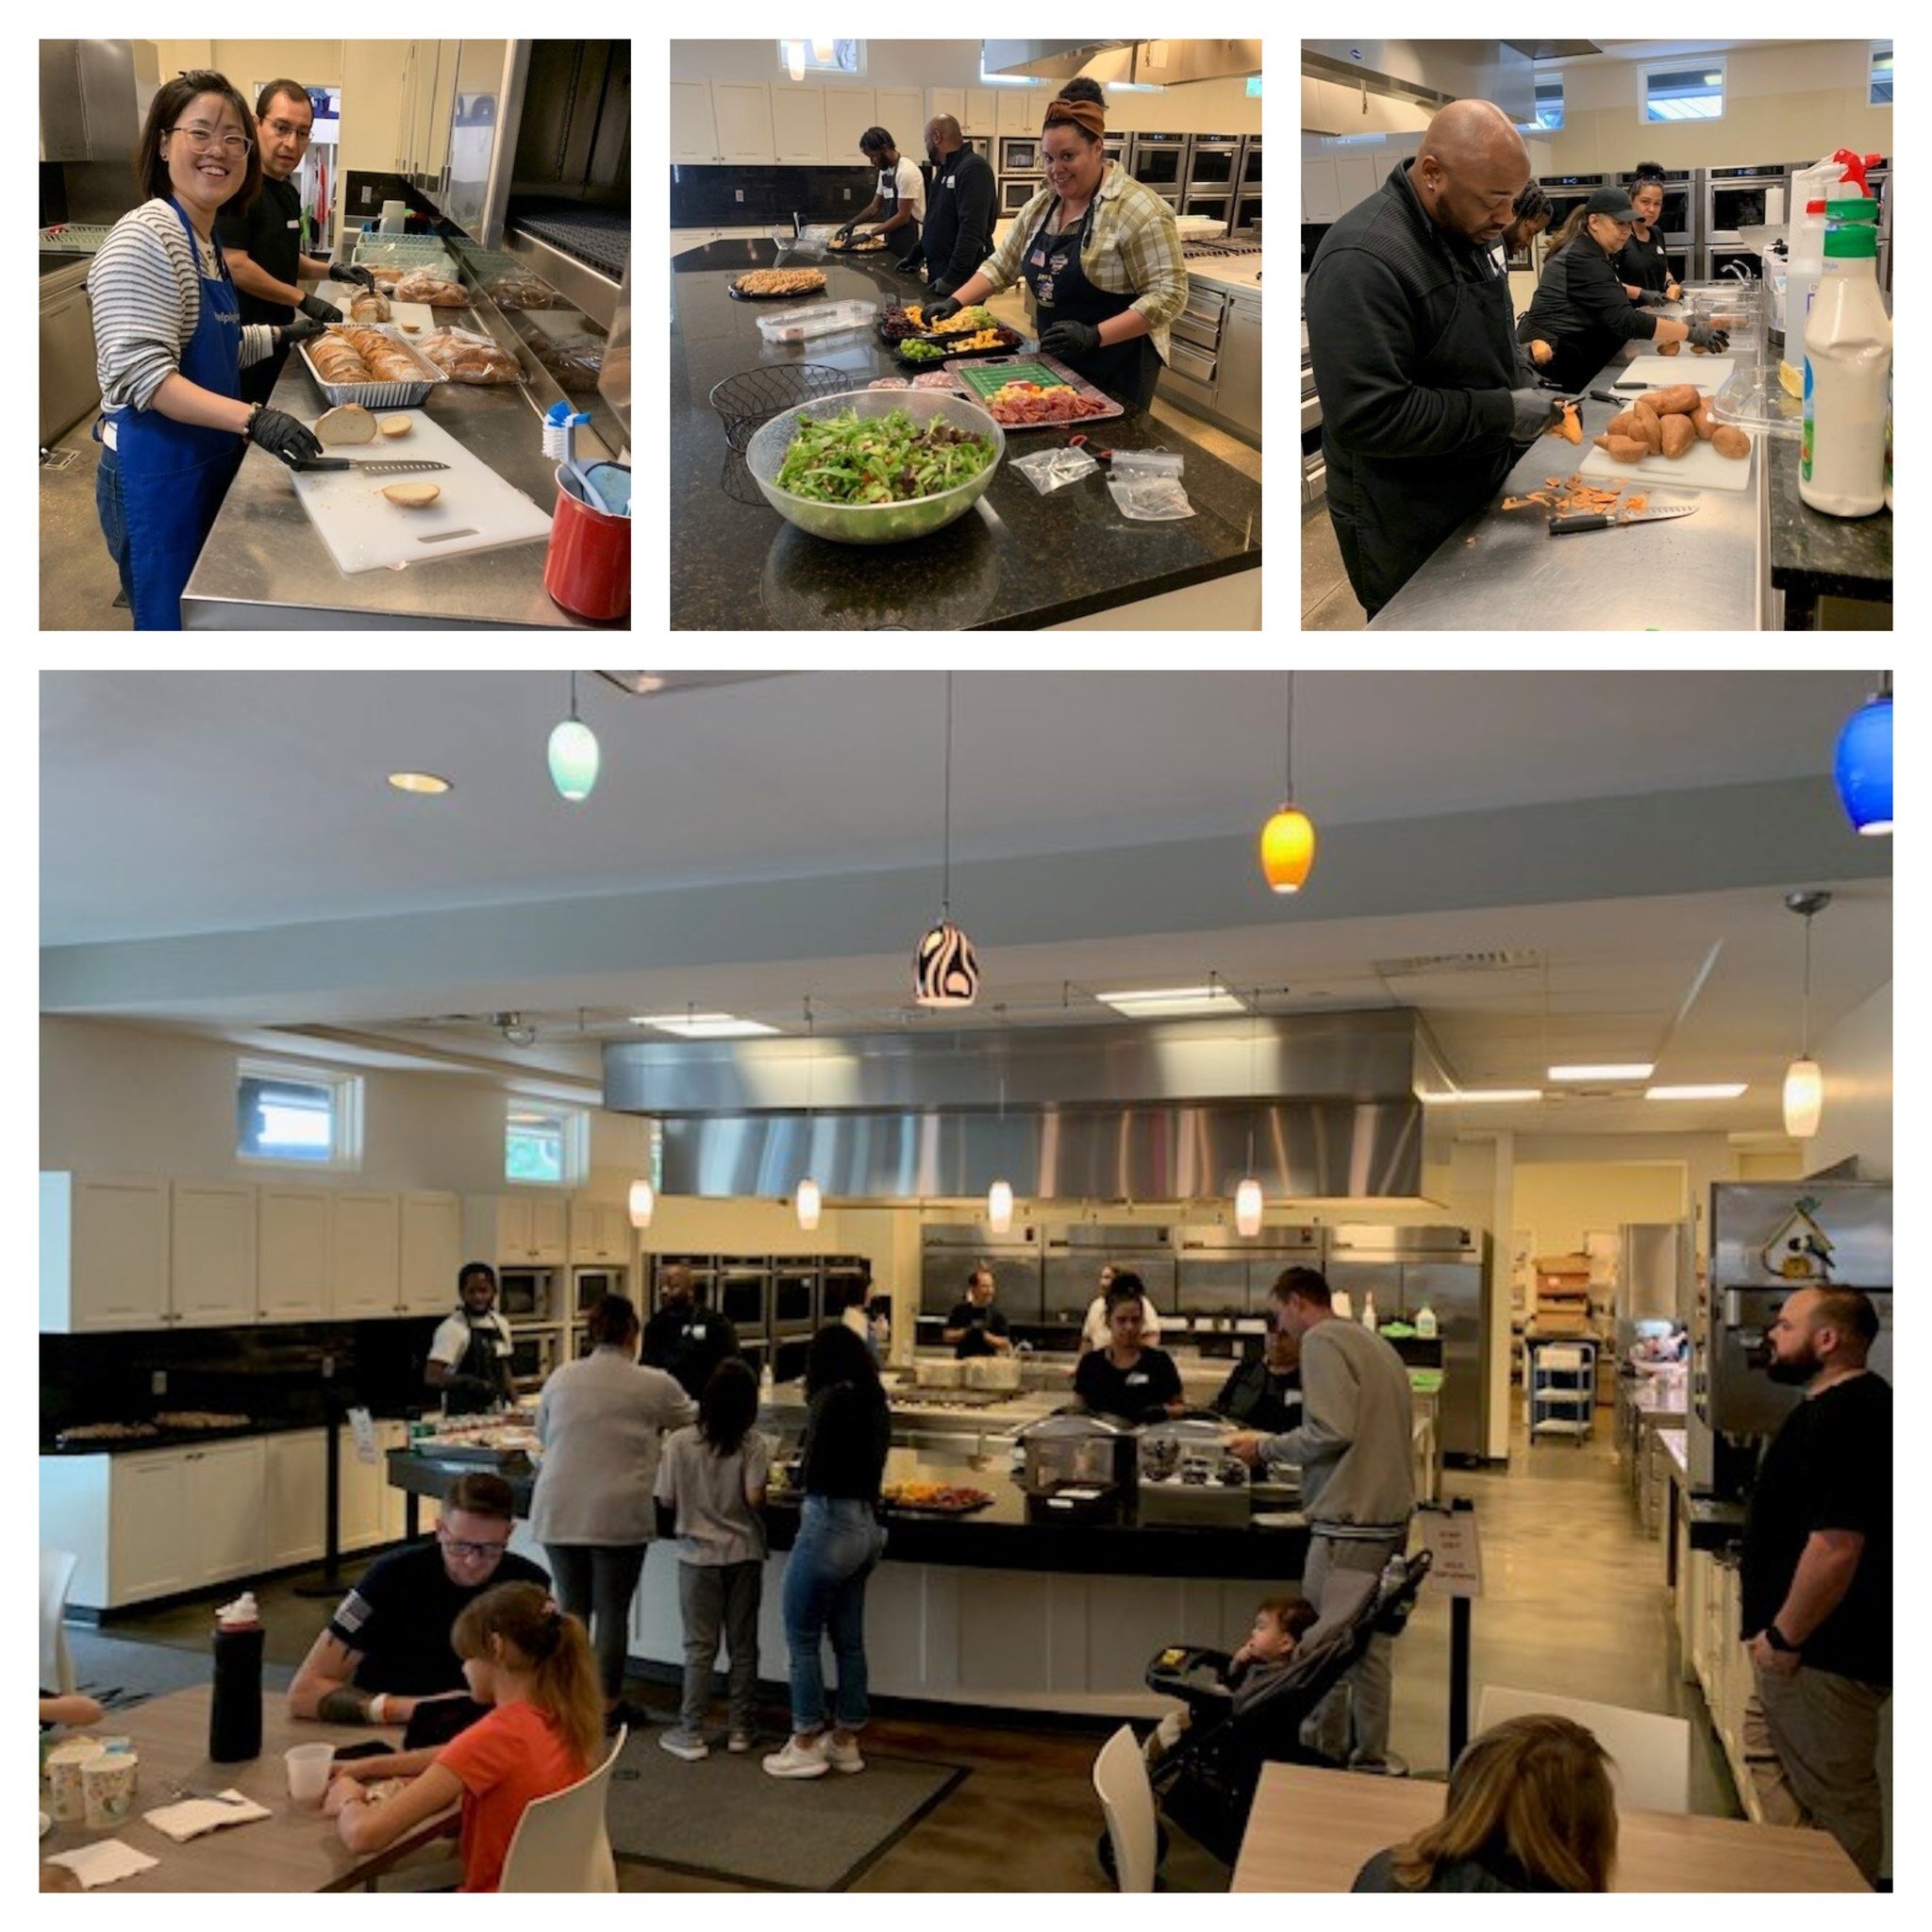 For February MISA/Endless Hope supported The Ronald McDonald House. The Logistics Department served lunch to the families and patients staying at the Ronald McDonald House that were there due to some level of treatment at the local Park Hospital Camp